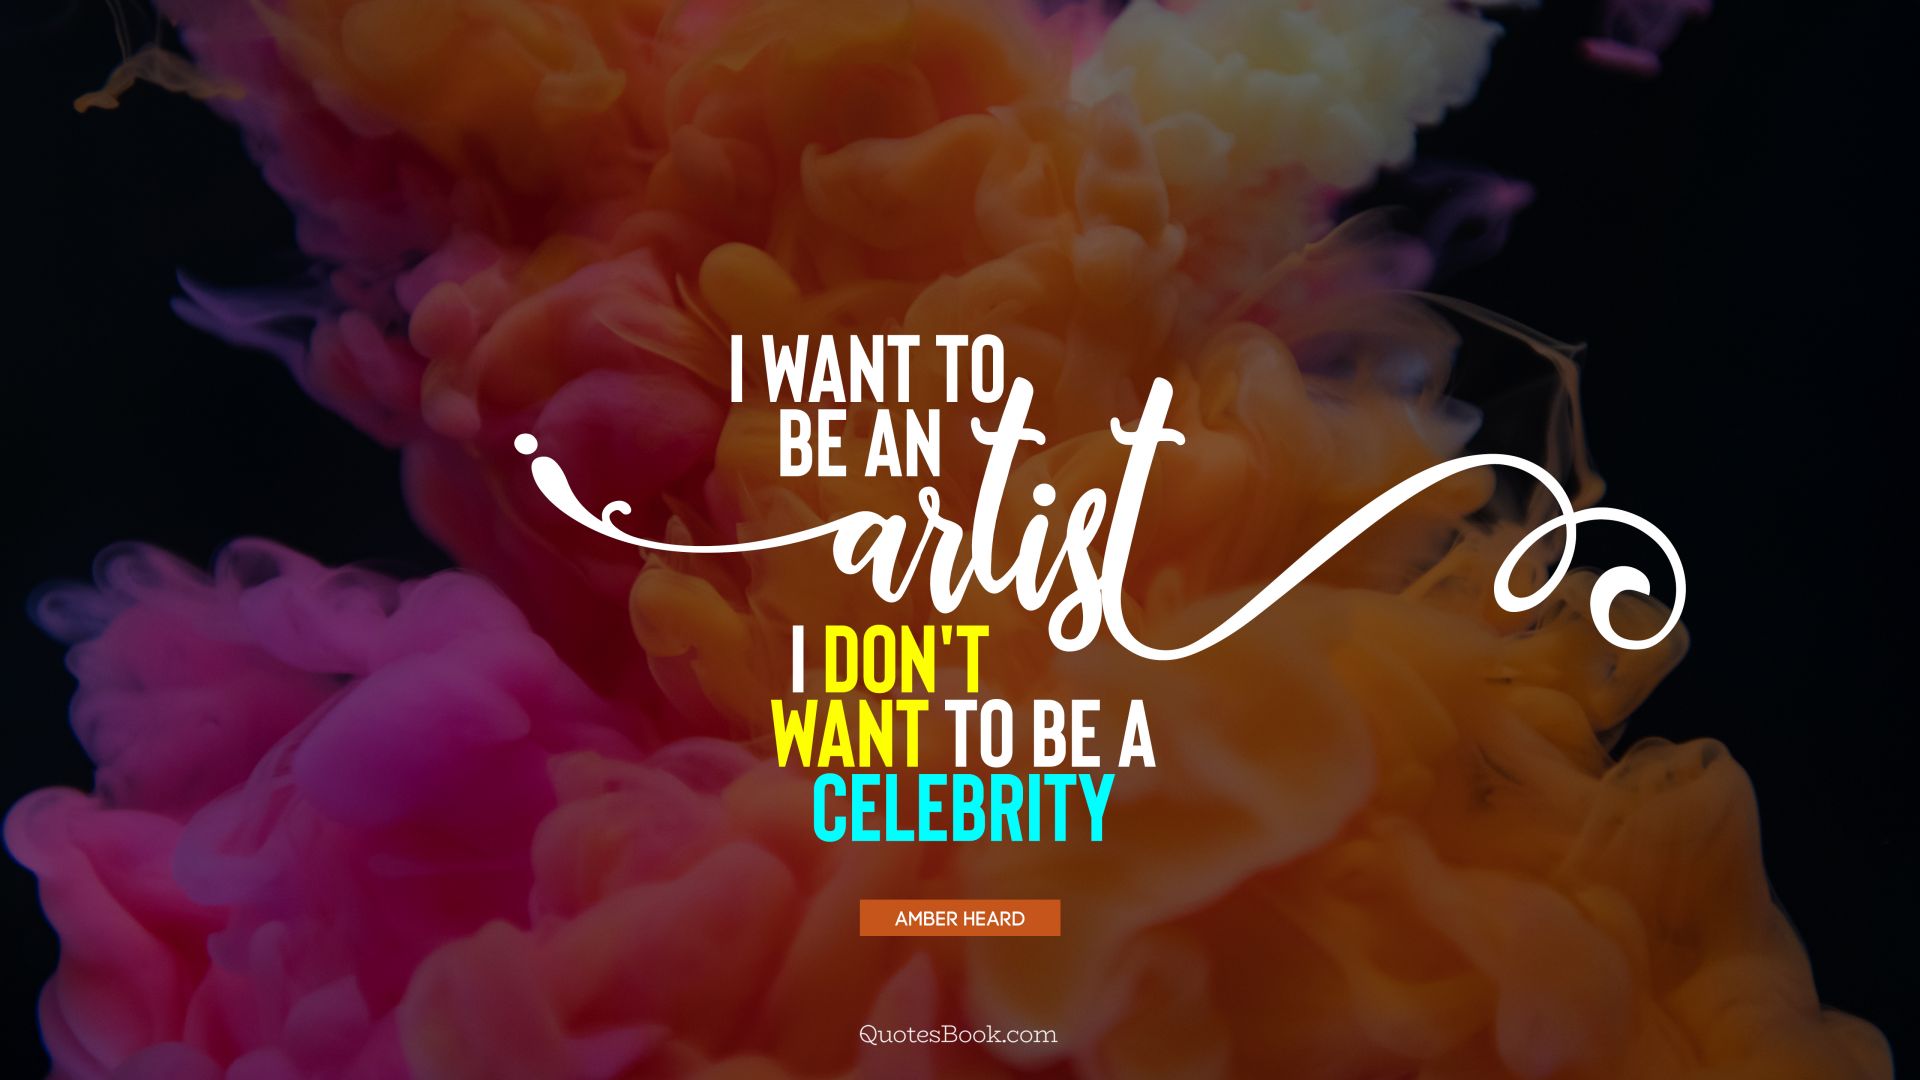 I want to be an artist. I don't want to be a celebrity. - Quote by Amber Heard